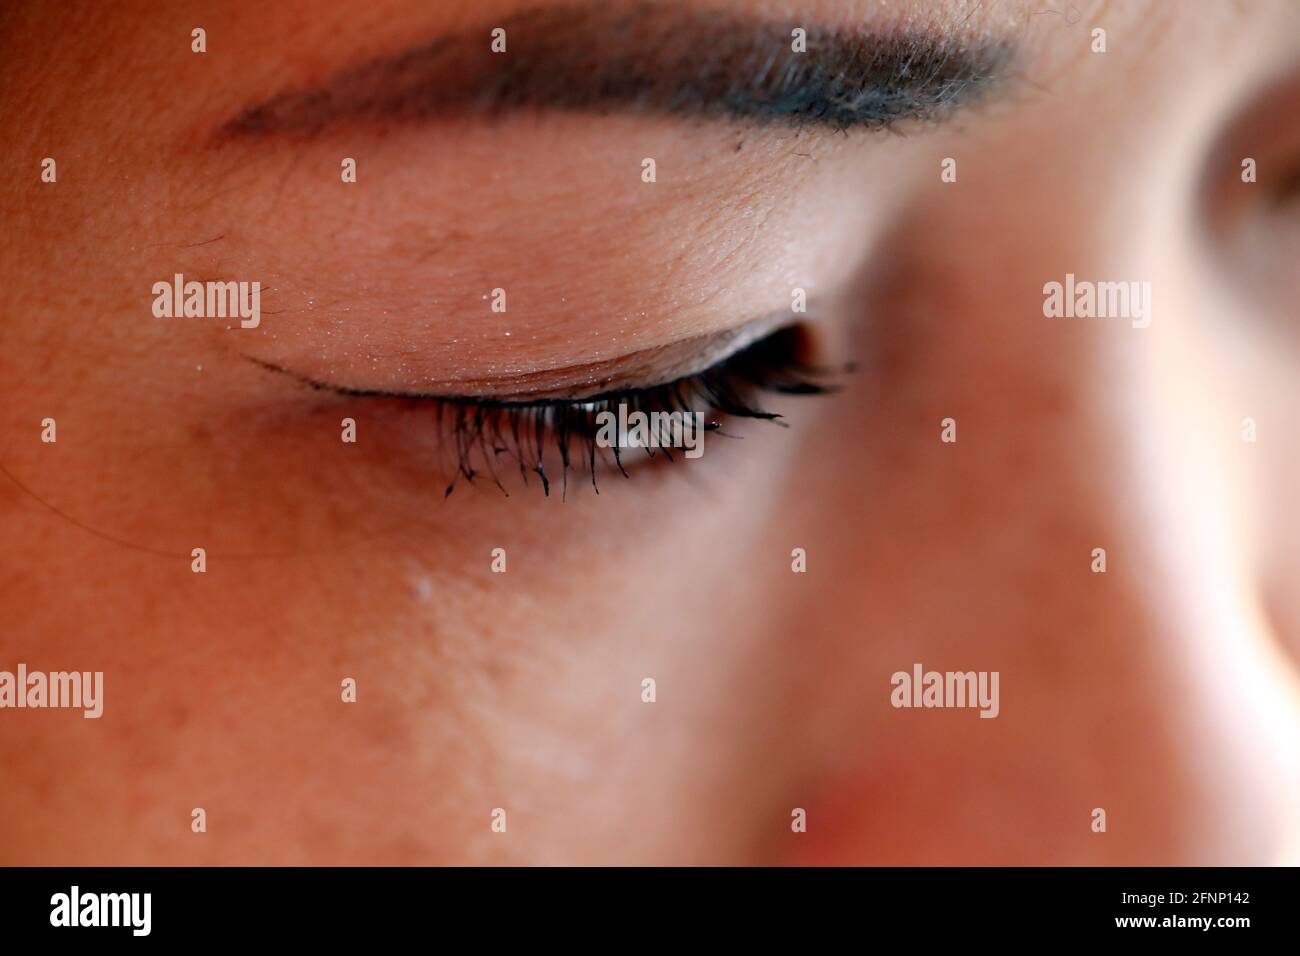 Close-up on a brown eye with mascara and natural skin look. France. Stock Photo